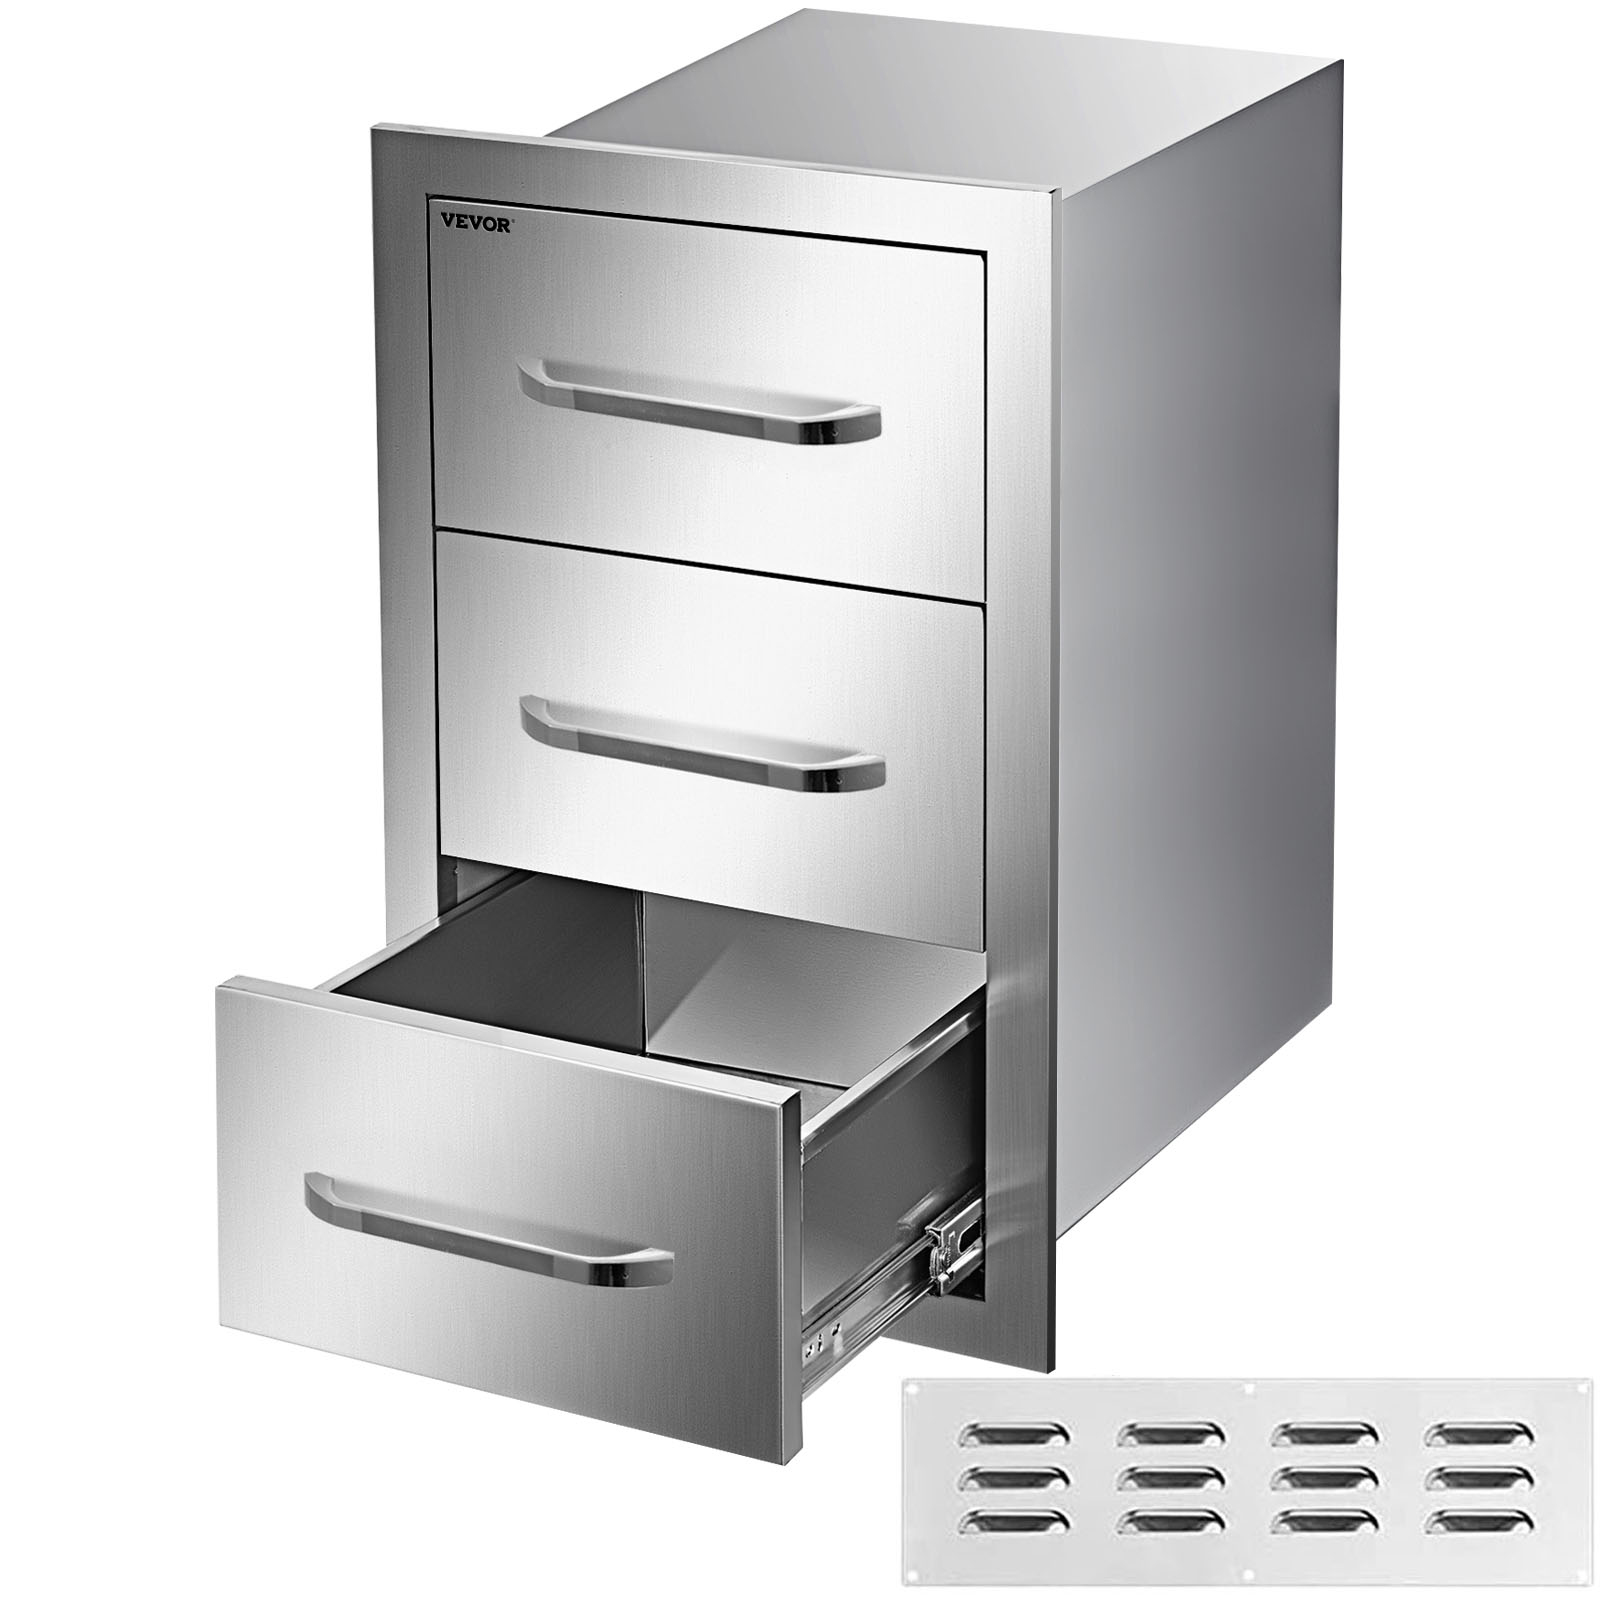 yuxiangBBQ Outdoor Kitchen Drawers Stainless Steel,14 W x 15 H Double Drawers,Flush Mount for Outdoor Kitchen or BBQ Island 